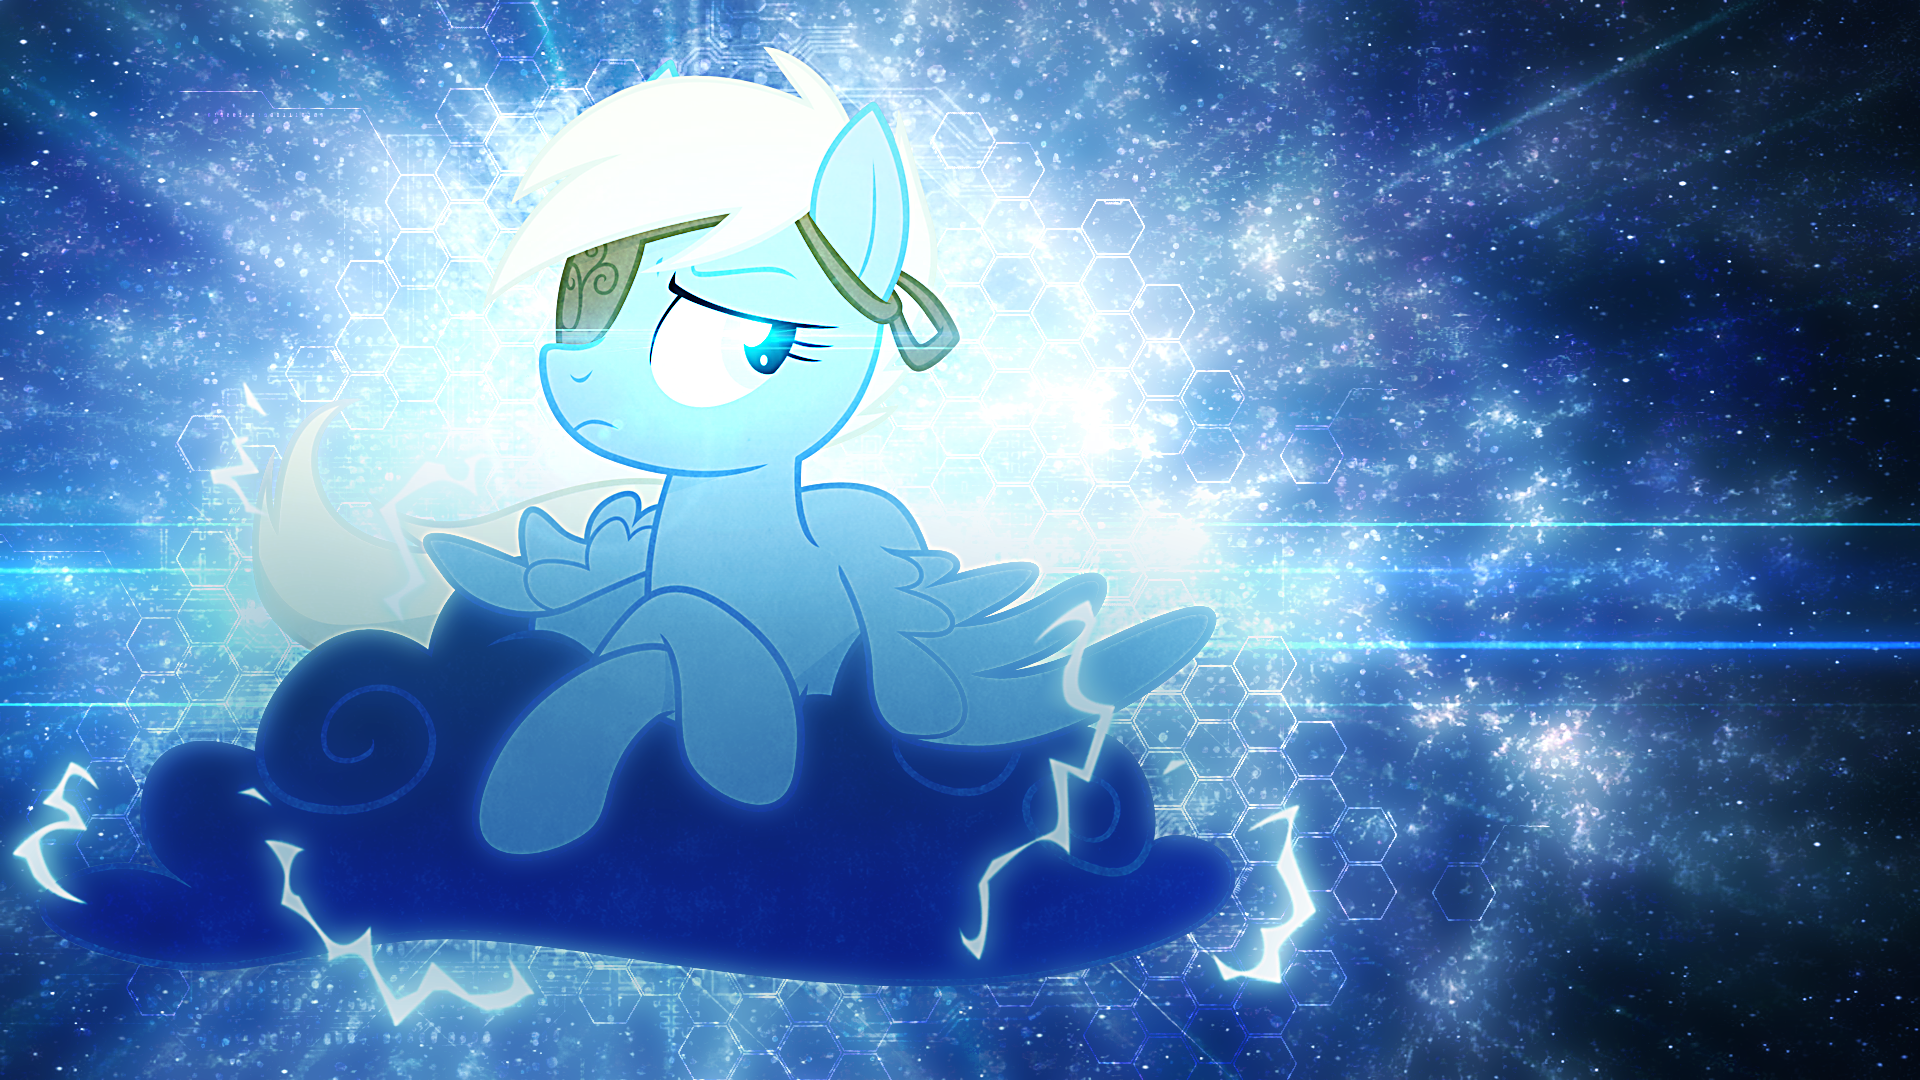 General Derpy and her cloud - Wallpaper by Equestria-Prevails and Tzolkine